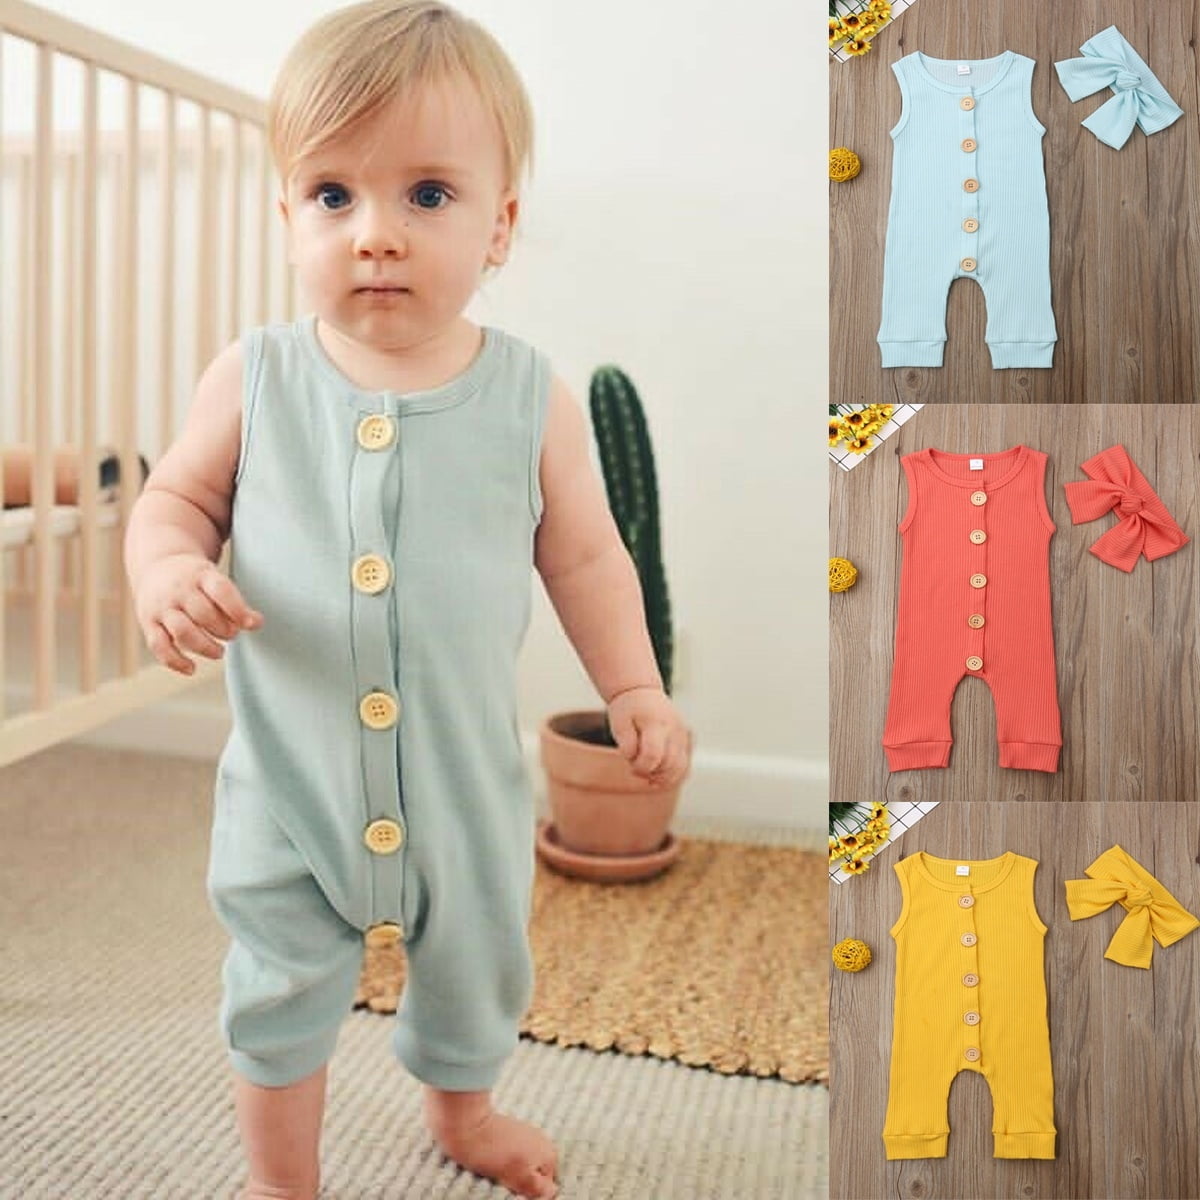 Toddler Infant Kids Baby Boys Girls Solid Romper Bodysuit Clothes Outfits 